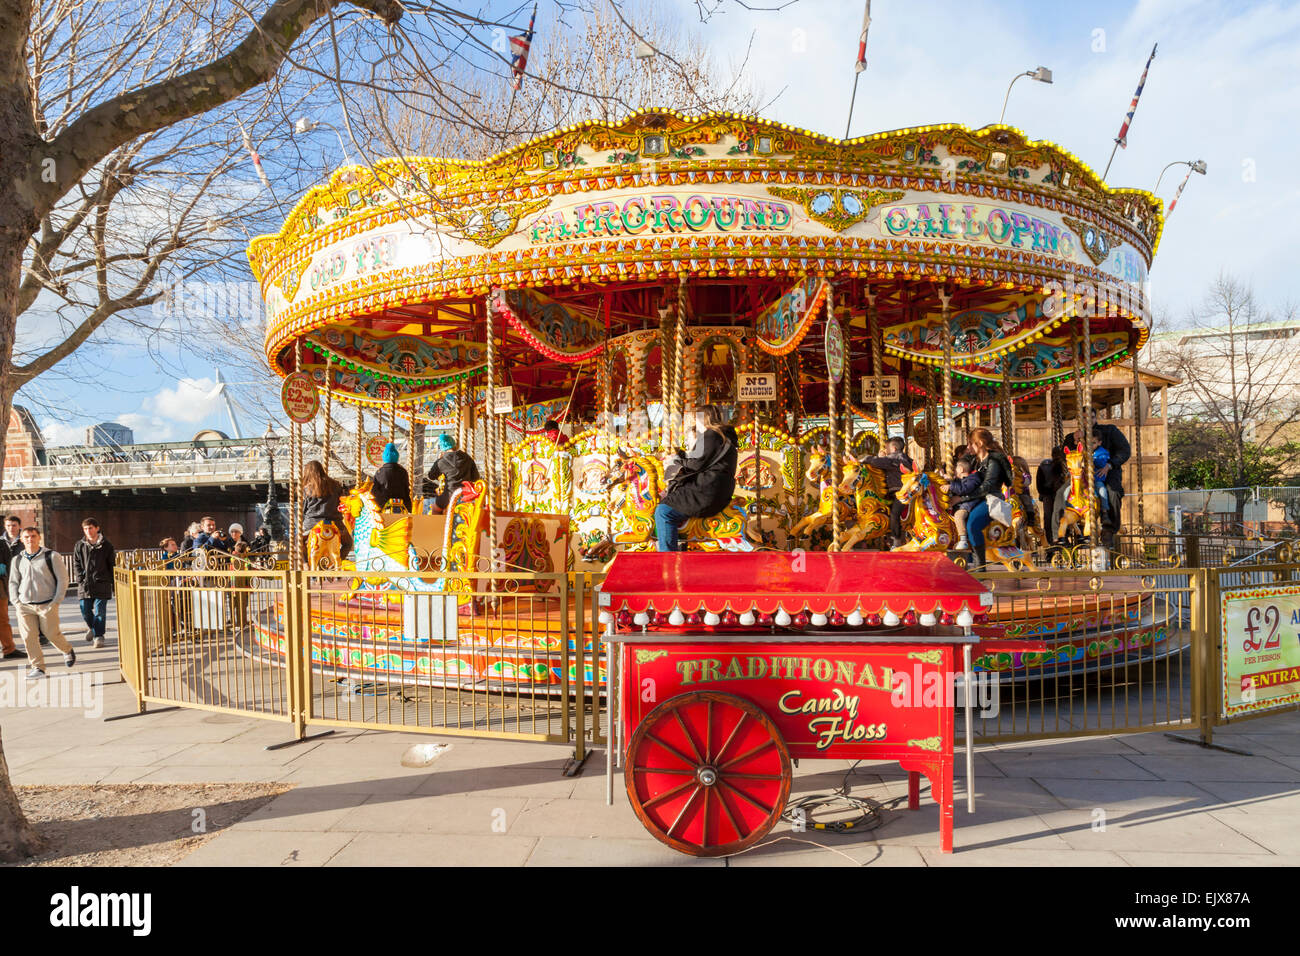 Traditional Galloping Horses Merry Go Round or roundabout, Southbank, London, England, UK Stock Photo